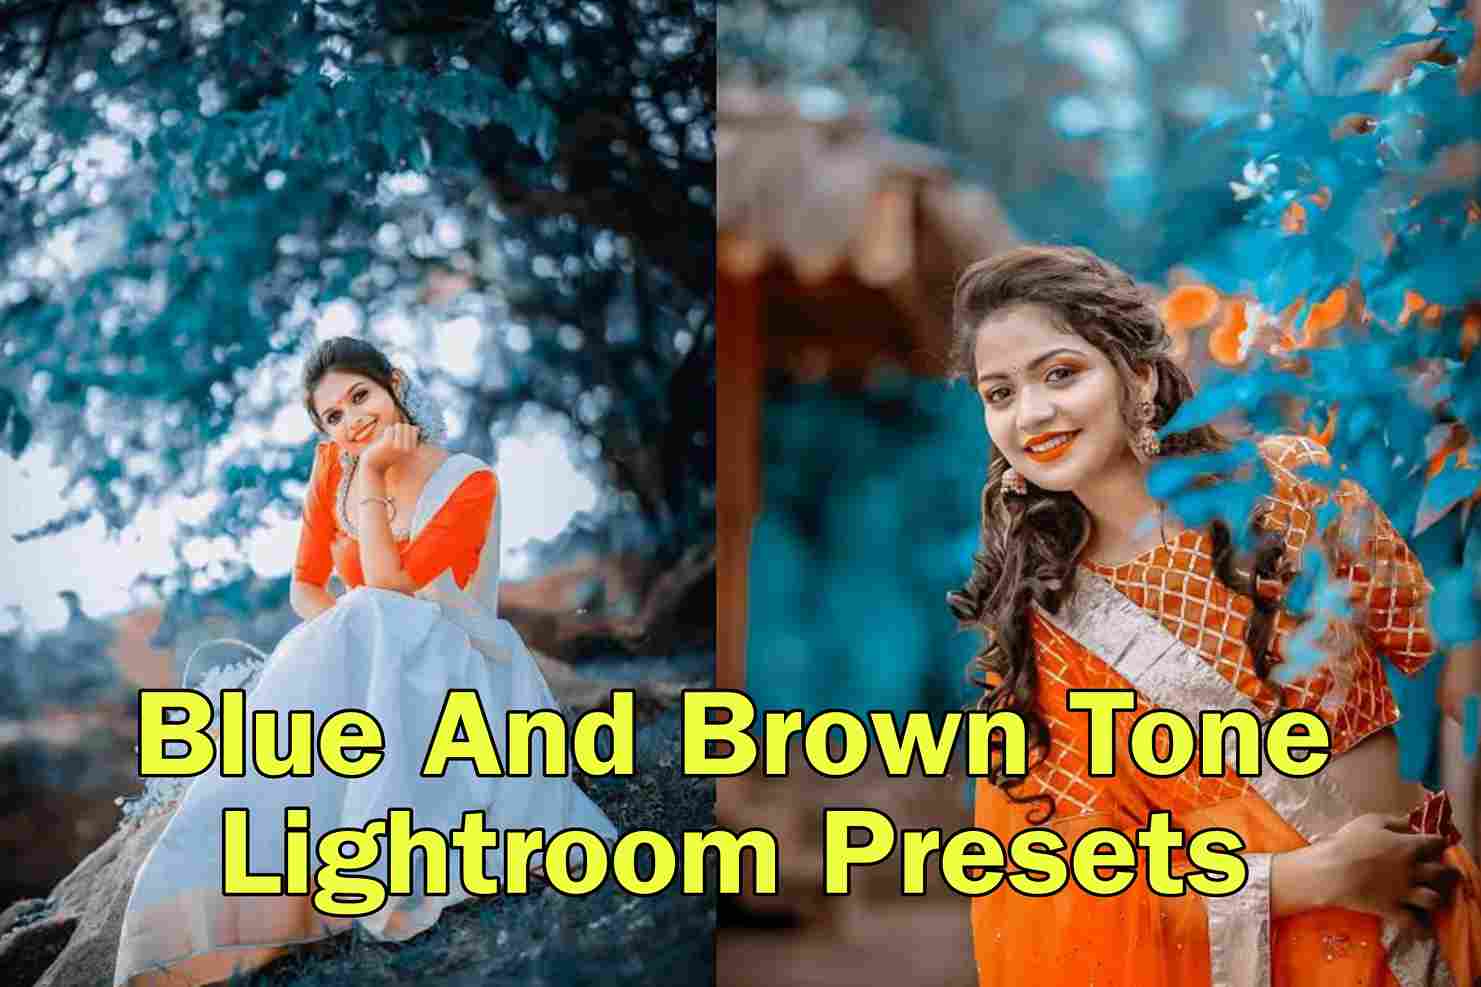 Blue And Brown Tone Lightroom Presets Free Download